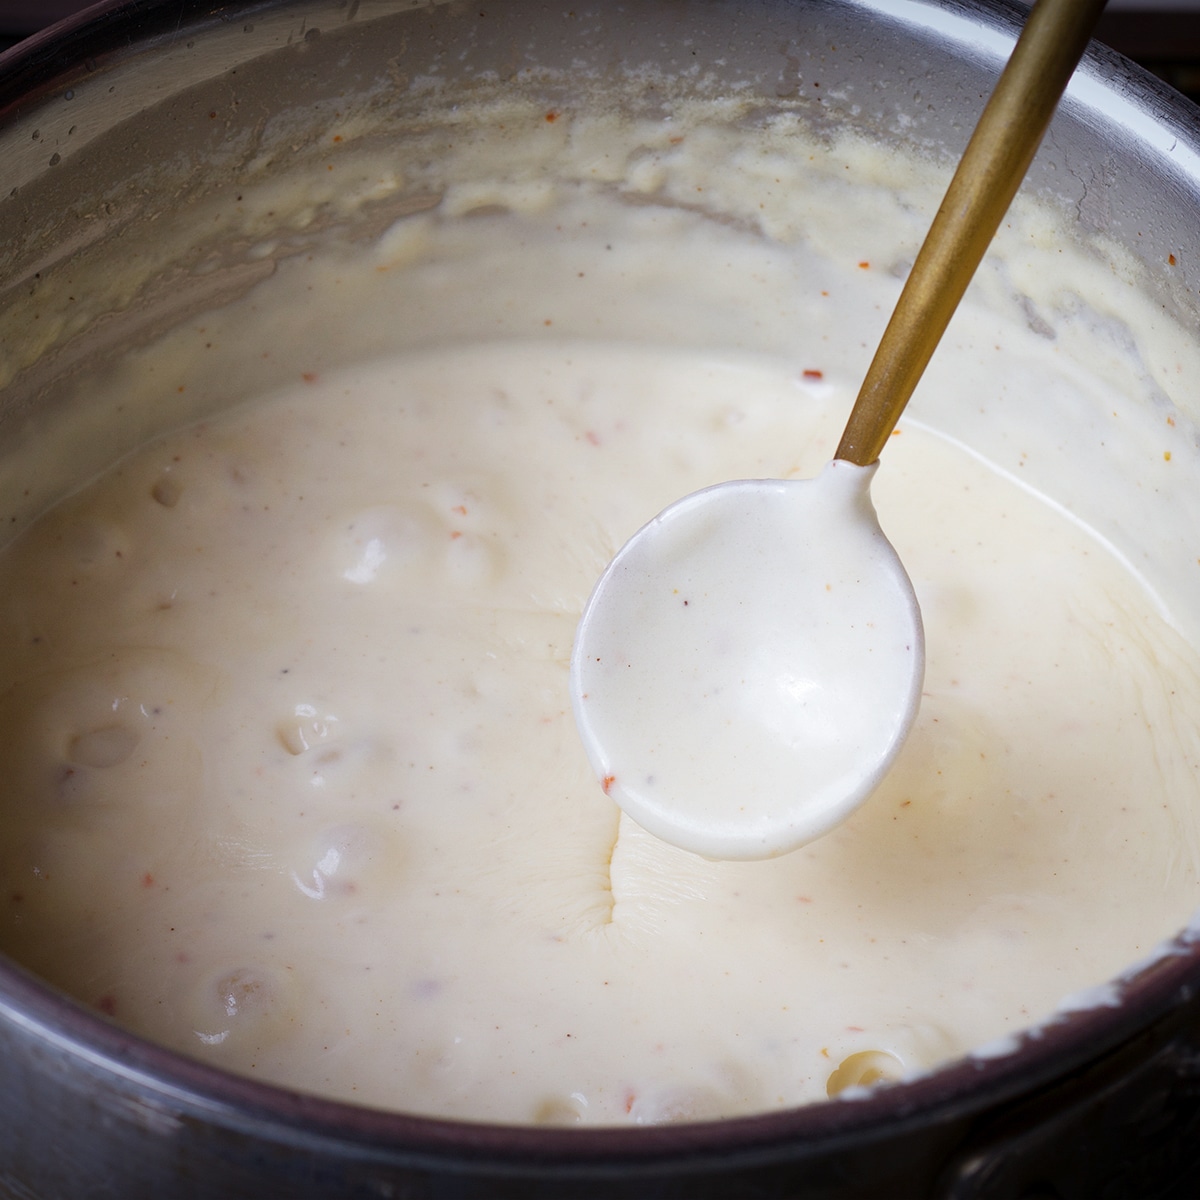 Lifting a spoon out of a saucepan of béchamel sauce to test how thick the sauce is.